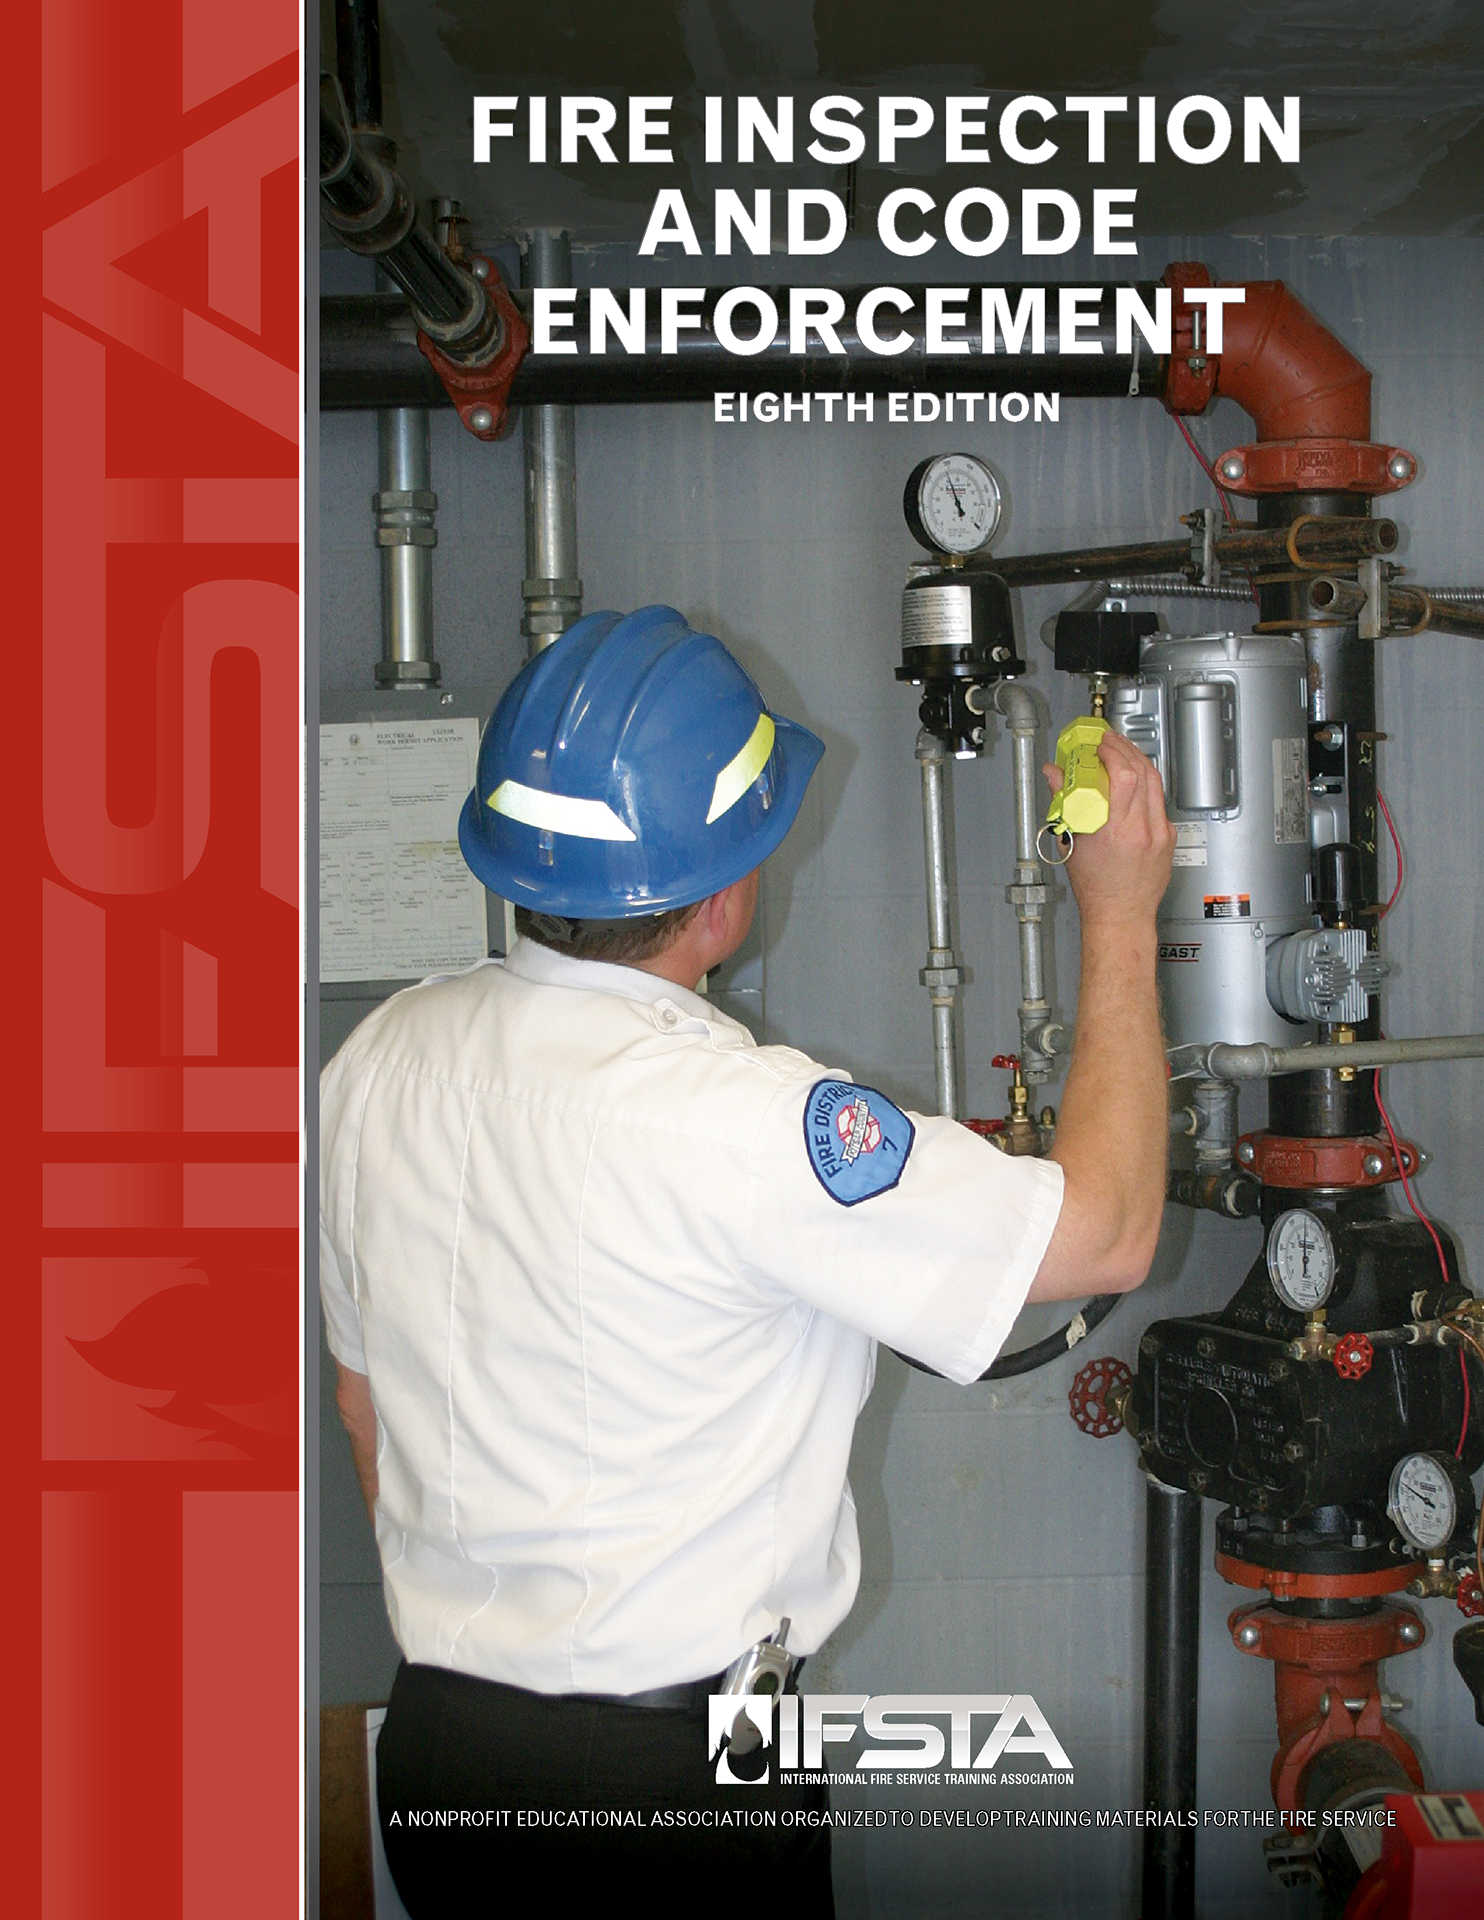 Fire Inspection and Code Enforcement, 8th Edition Manual